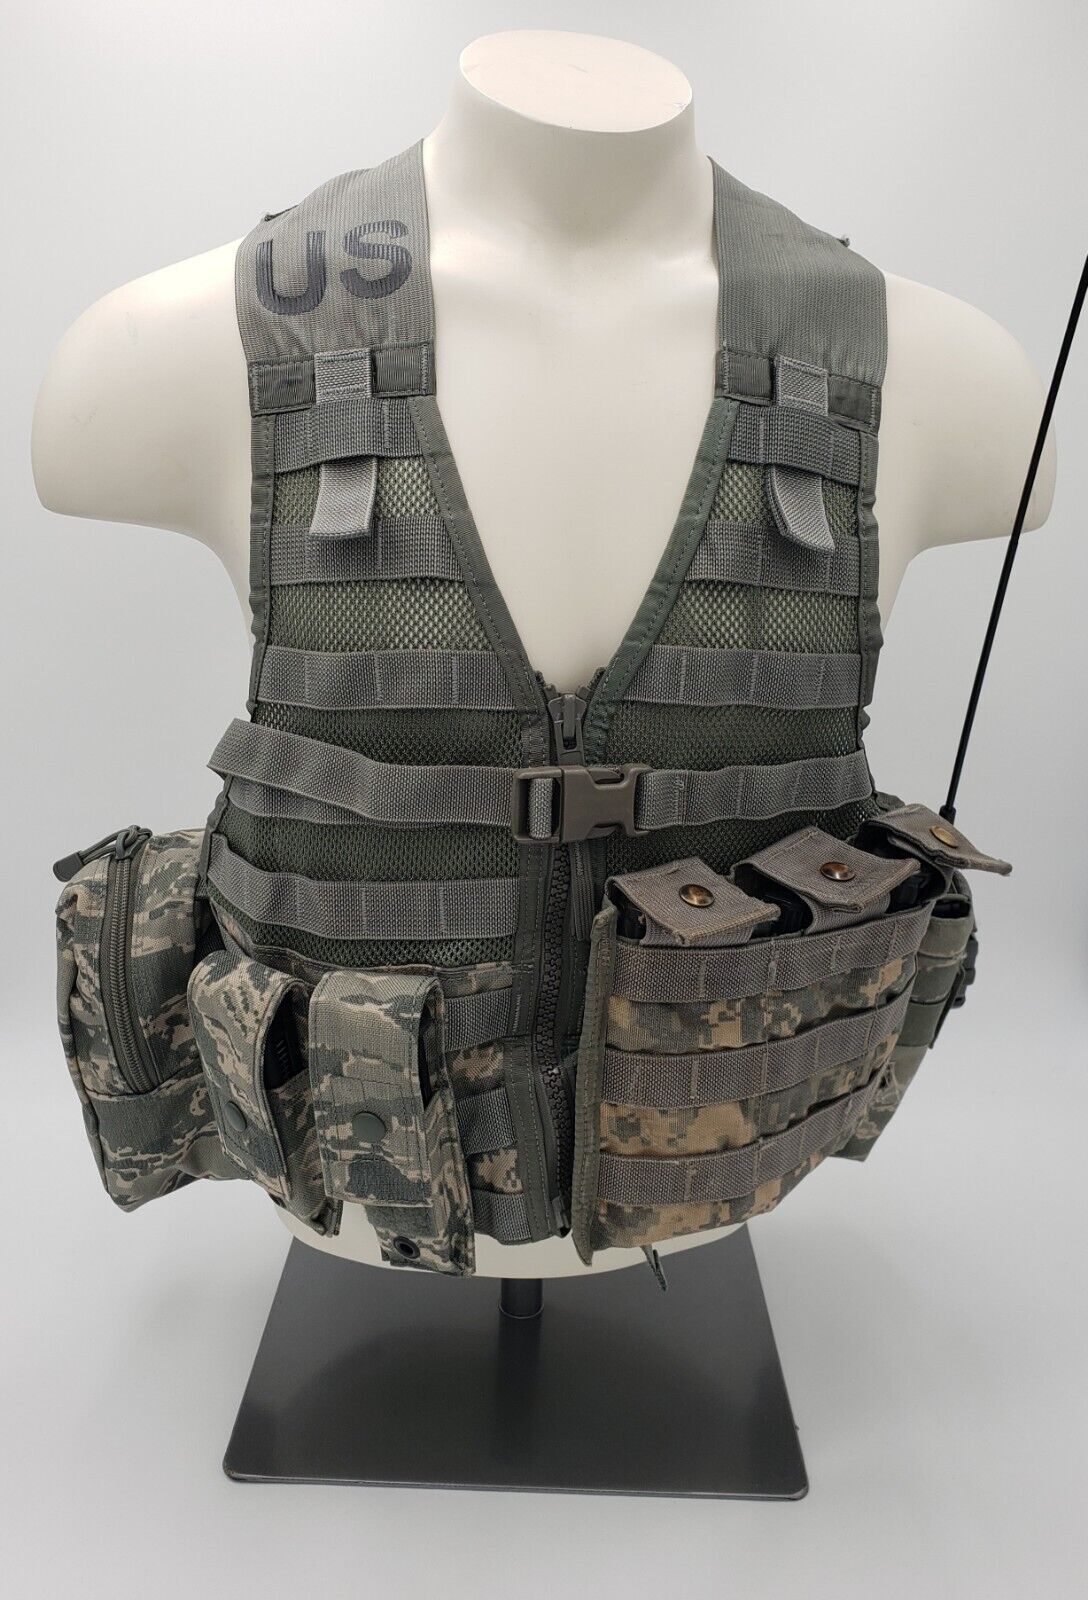 SURVIVAL GEAR 7 Piece Tactical Vest, Chest Rig, Mag Pouches, First Aid Kit USGI